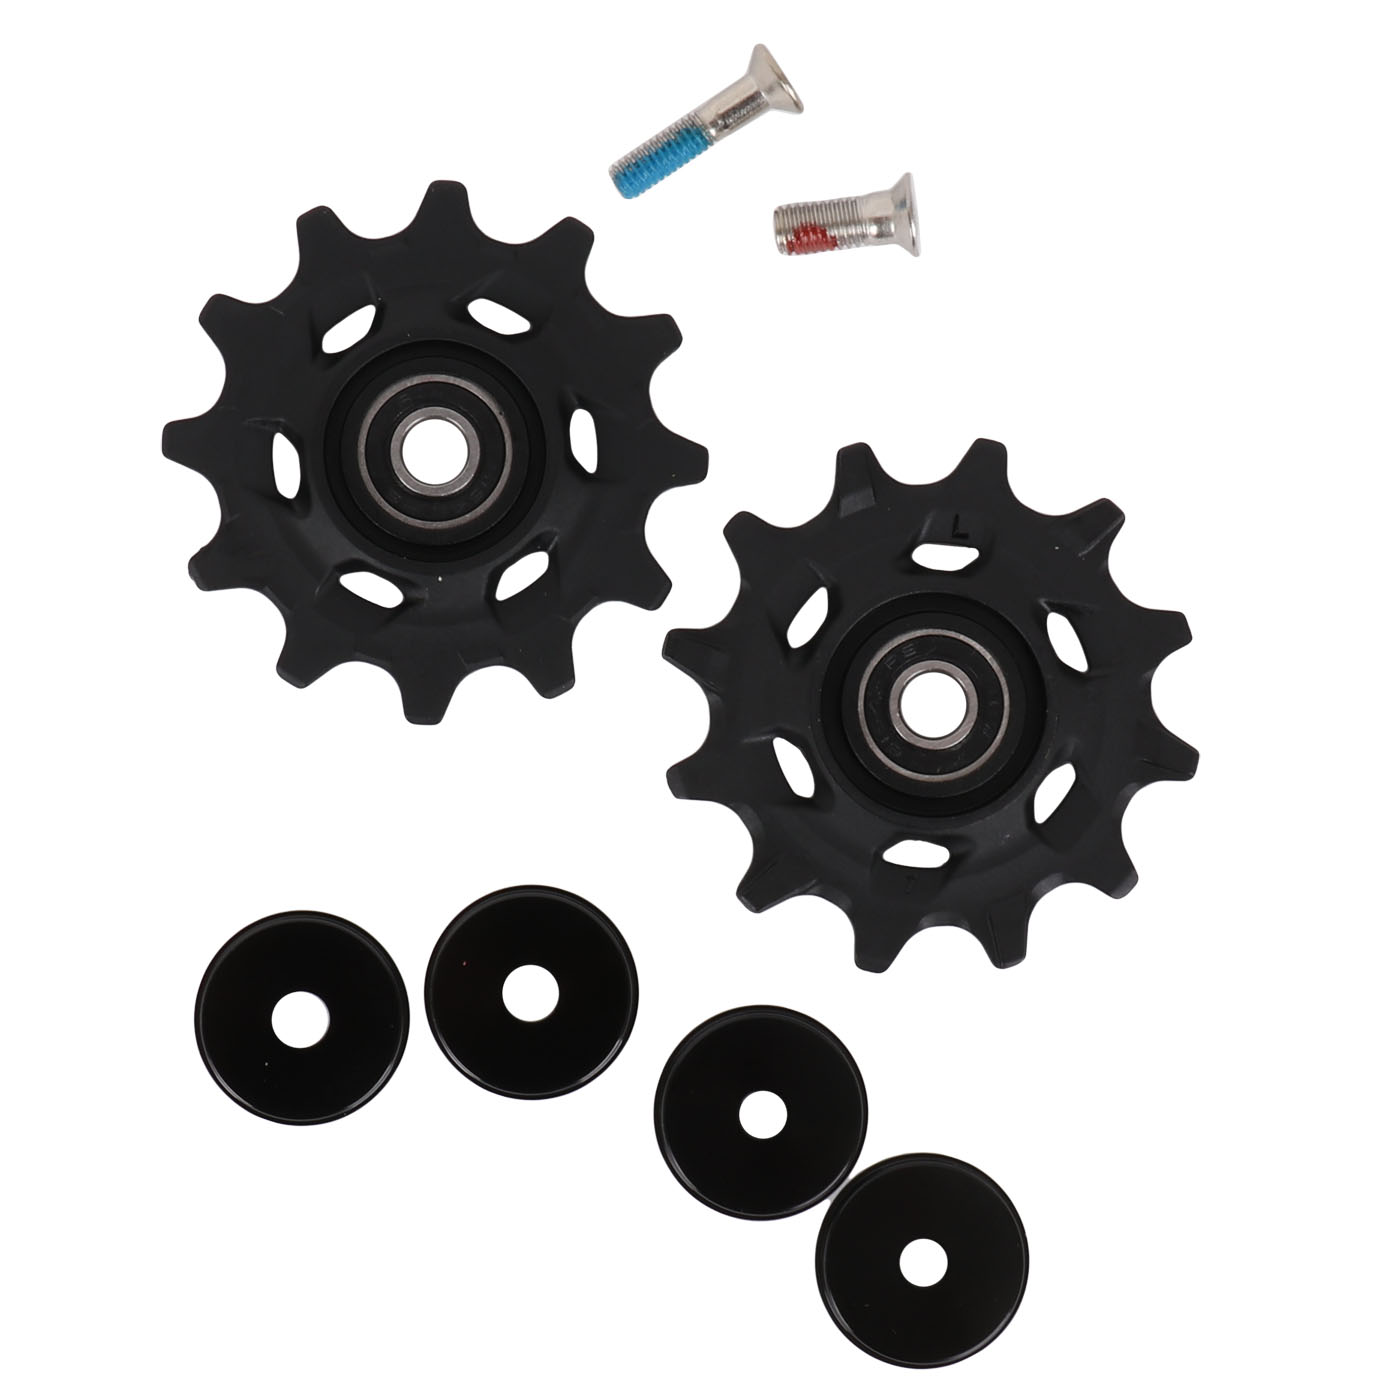 Picture of SRAM Pulley Kit for Rival eTap AXS Rear Derailleur - 12 Speed